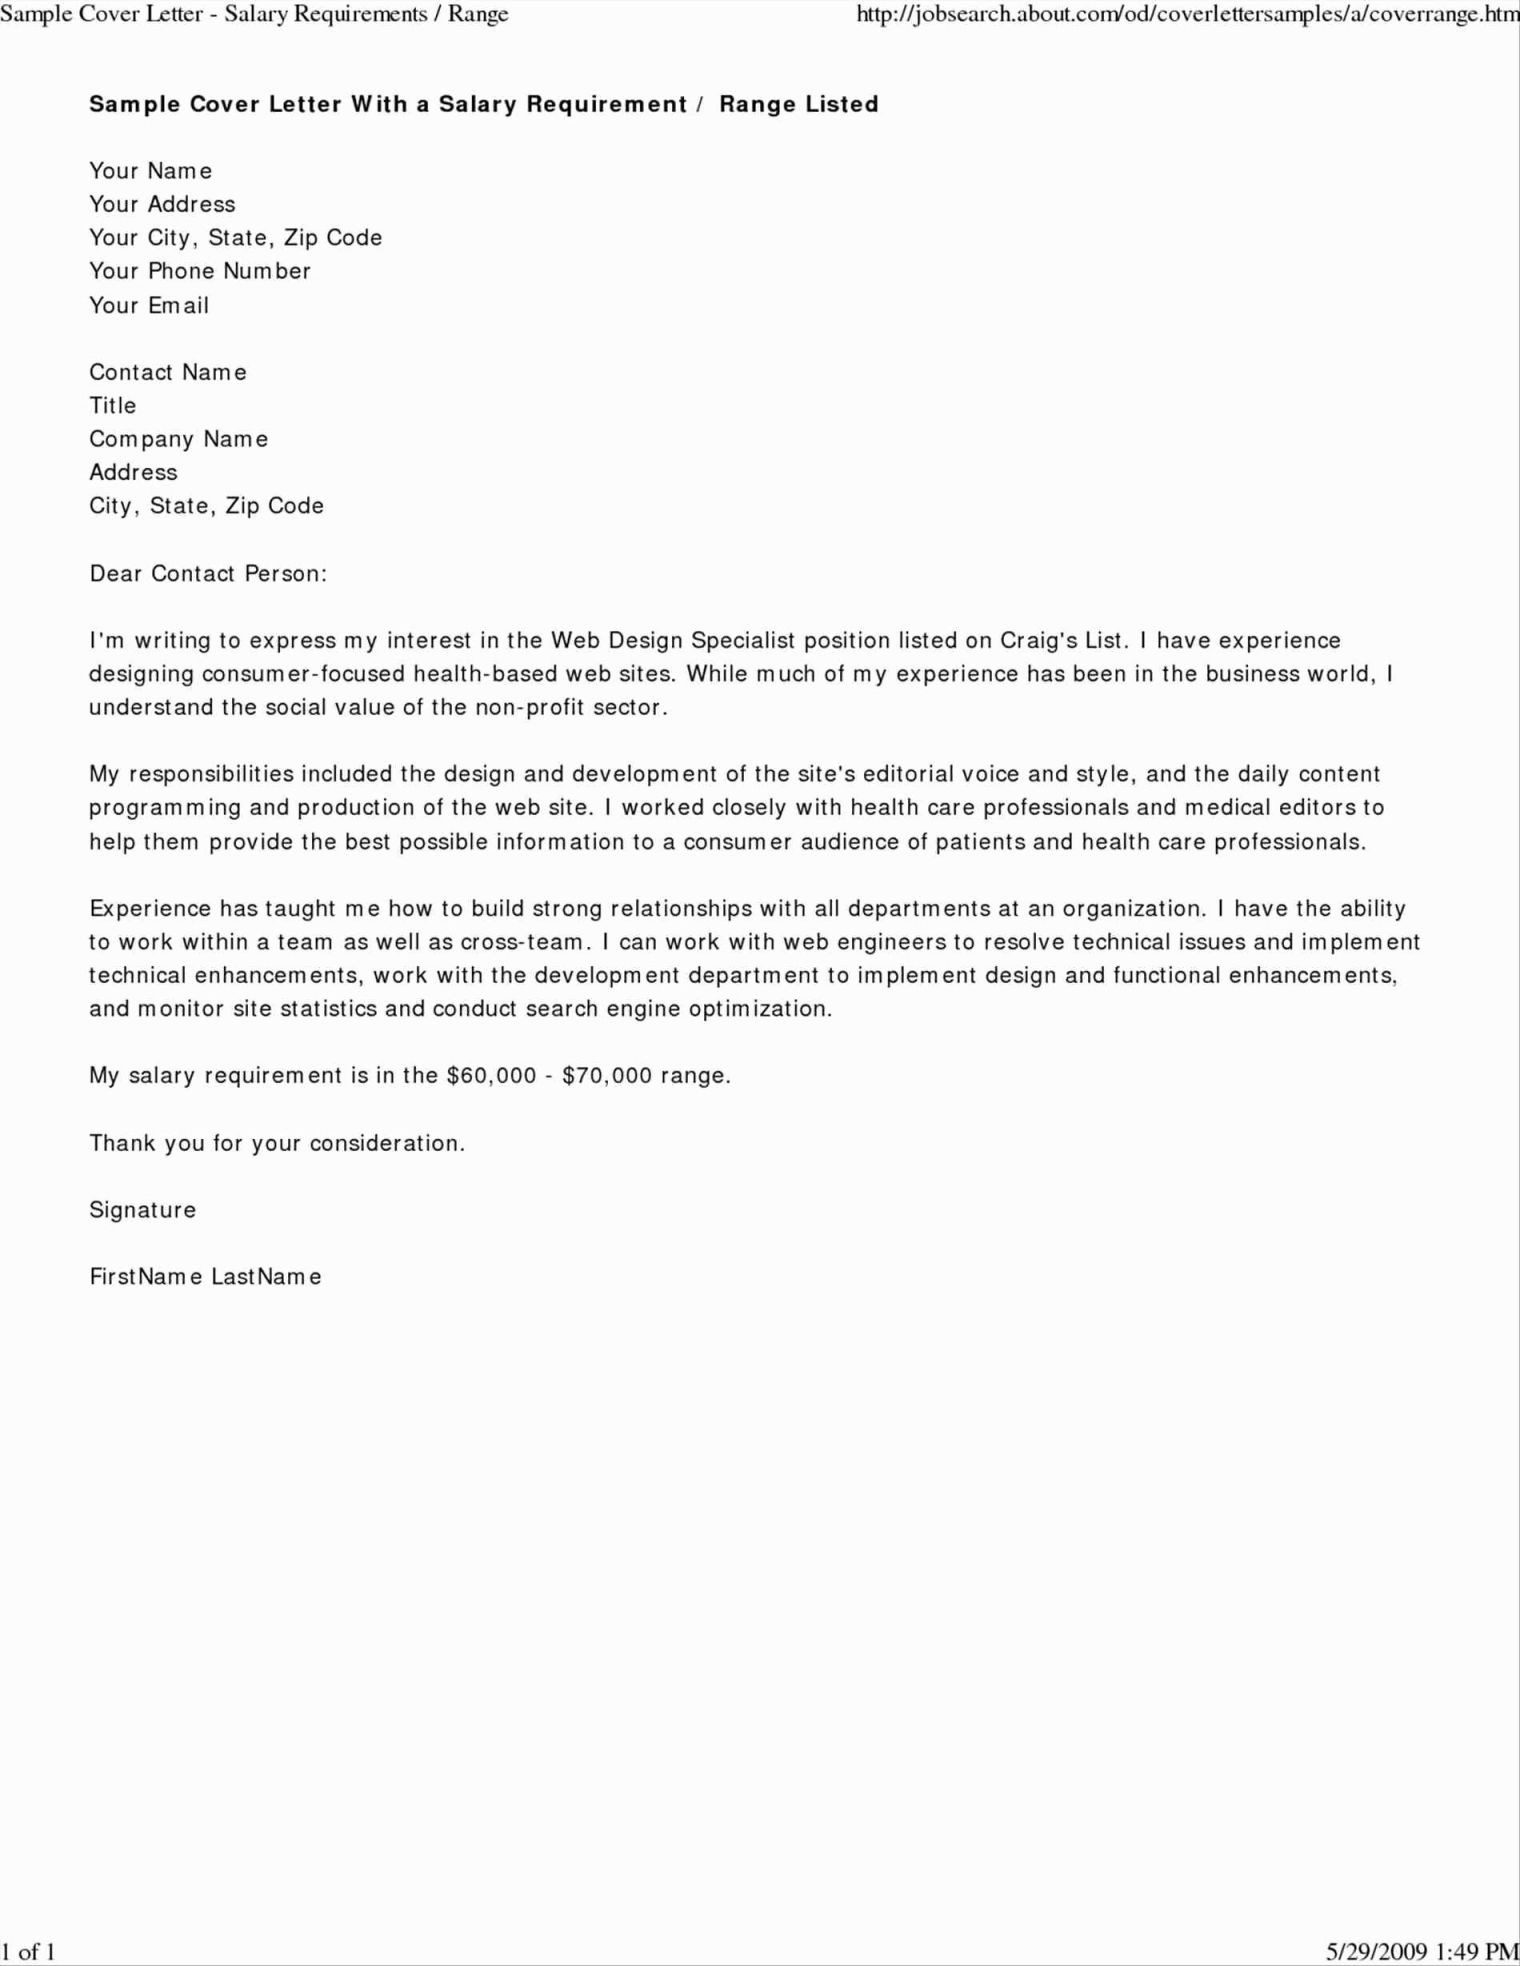 Field Trip Letter Template - New Field Trip Letter Iy39 – Documentaries for Change